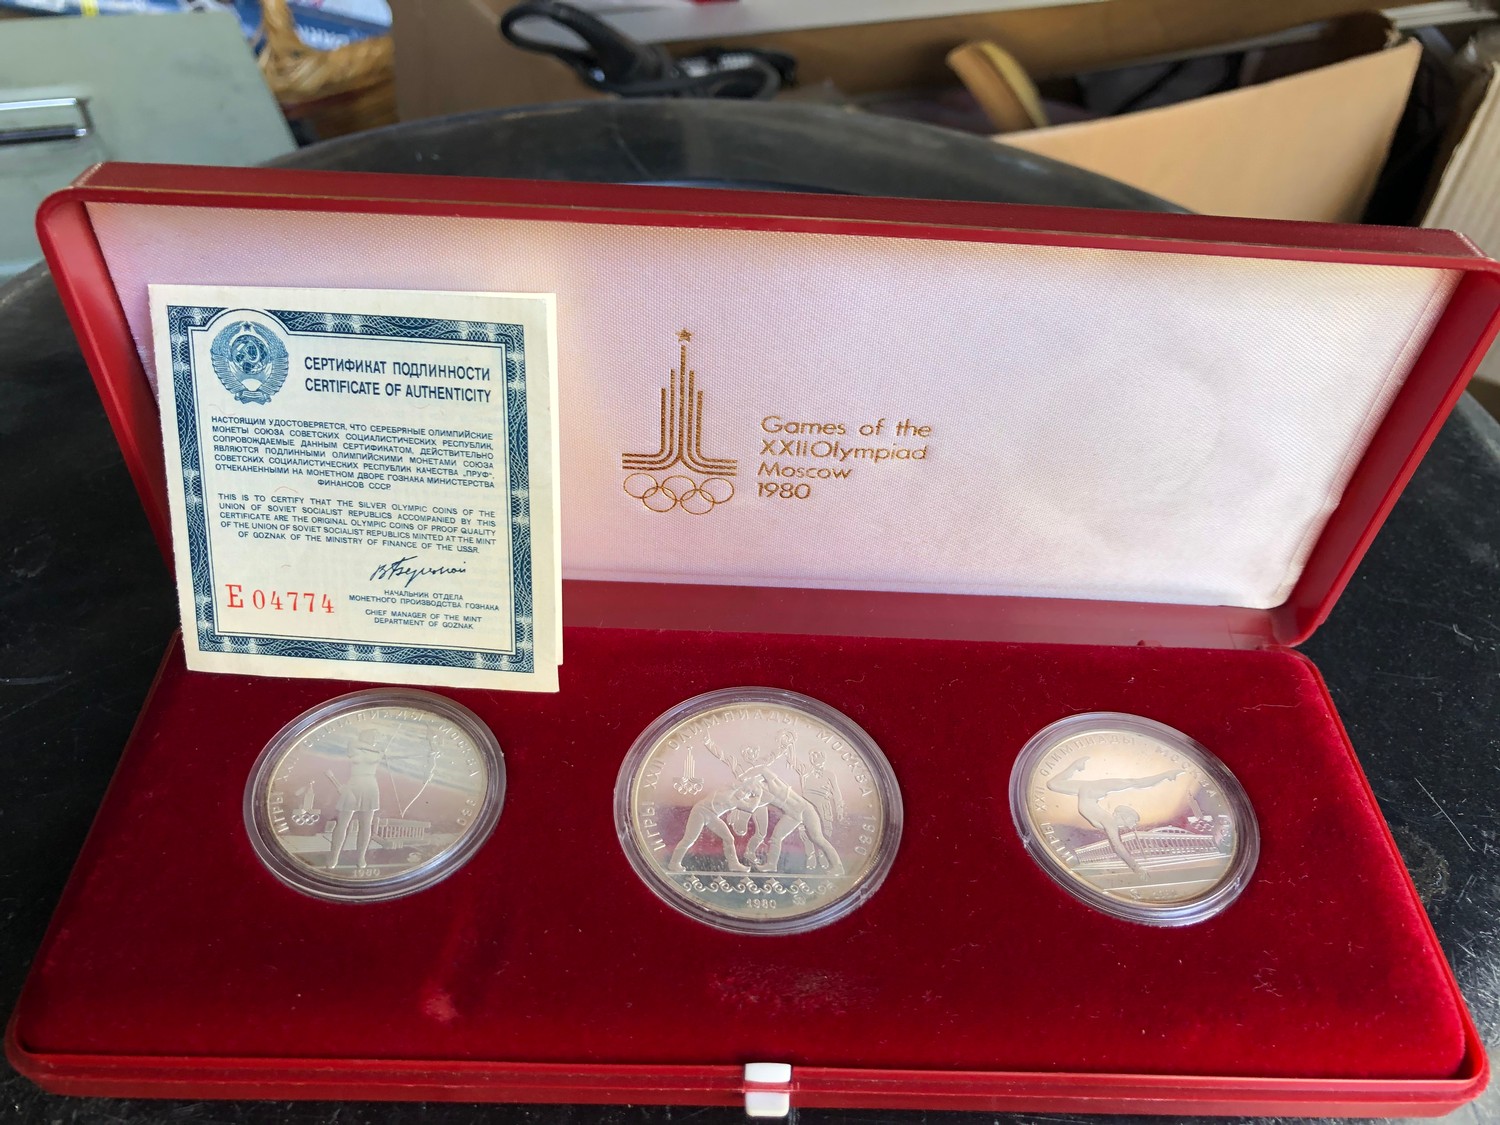 Games of The XXII Olympiad Moscow 1980 Silver Medals 900 with